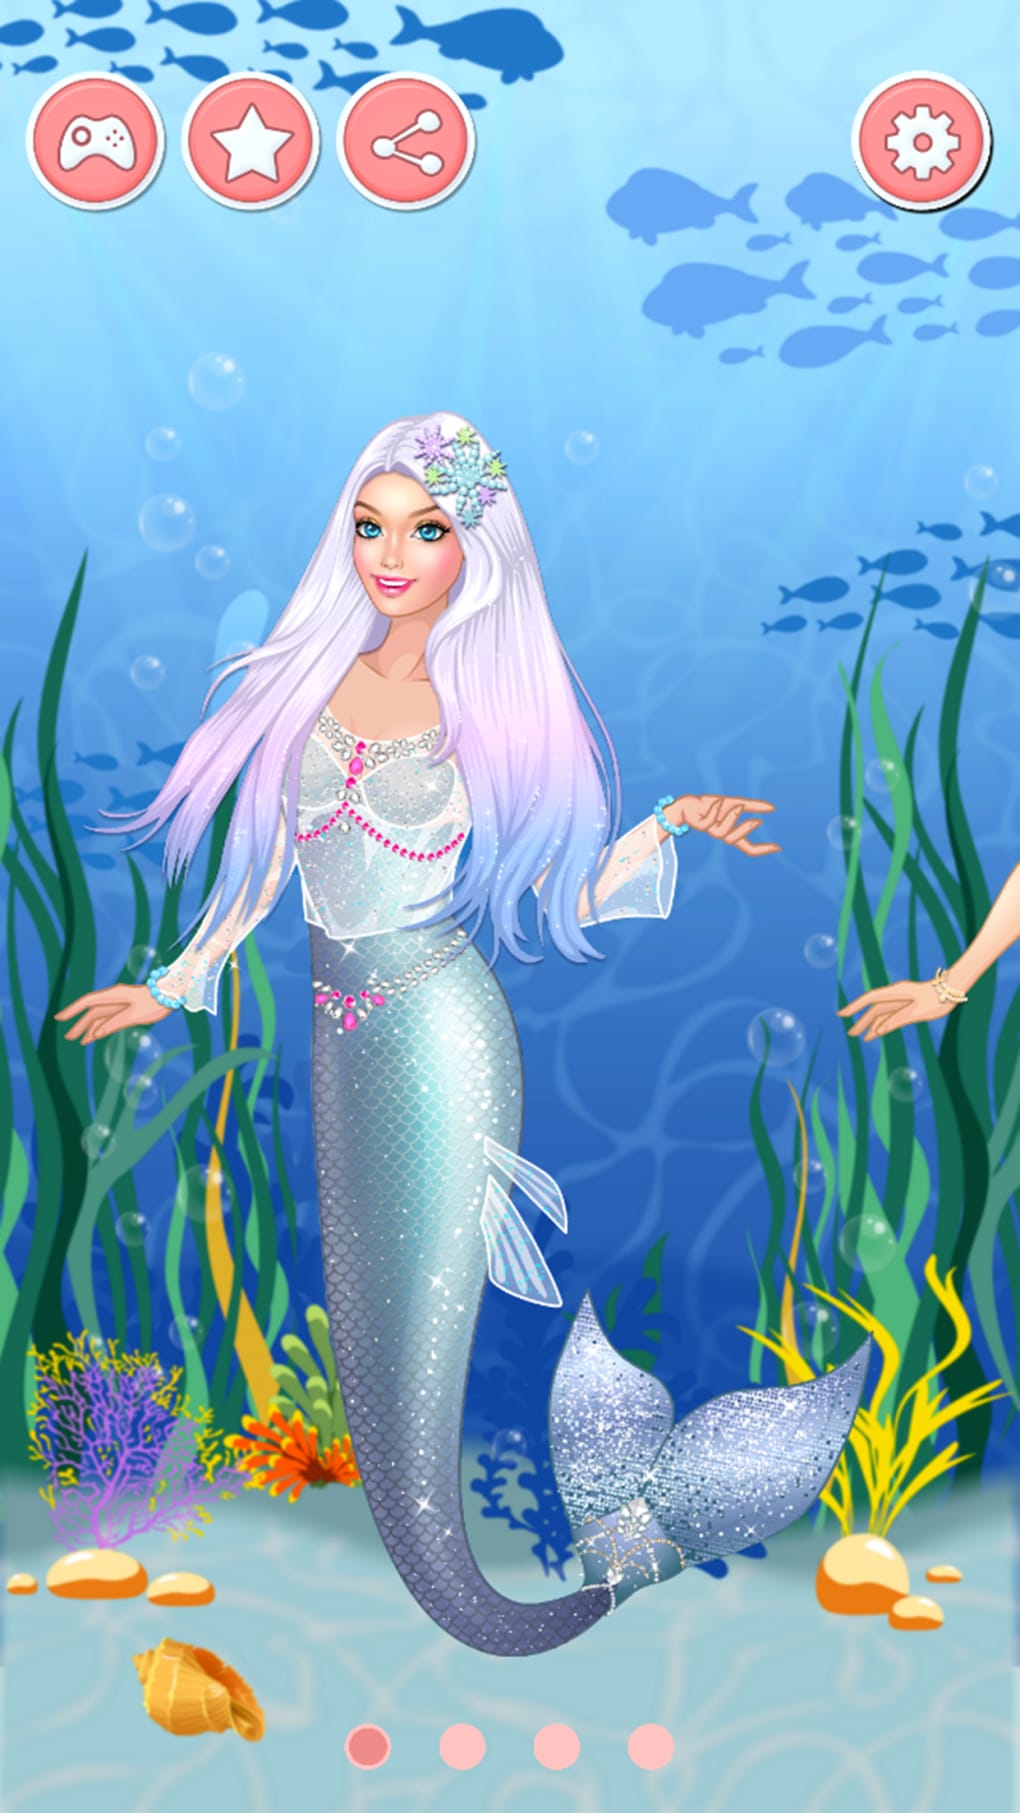 Mermaid Princess Beauty for iPhone - Download